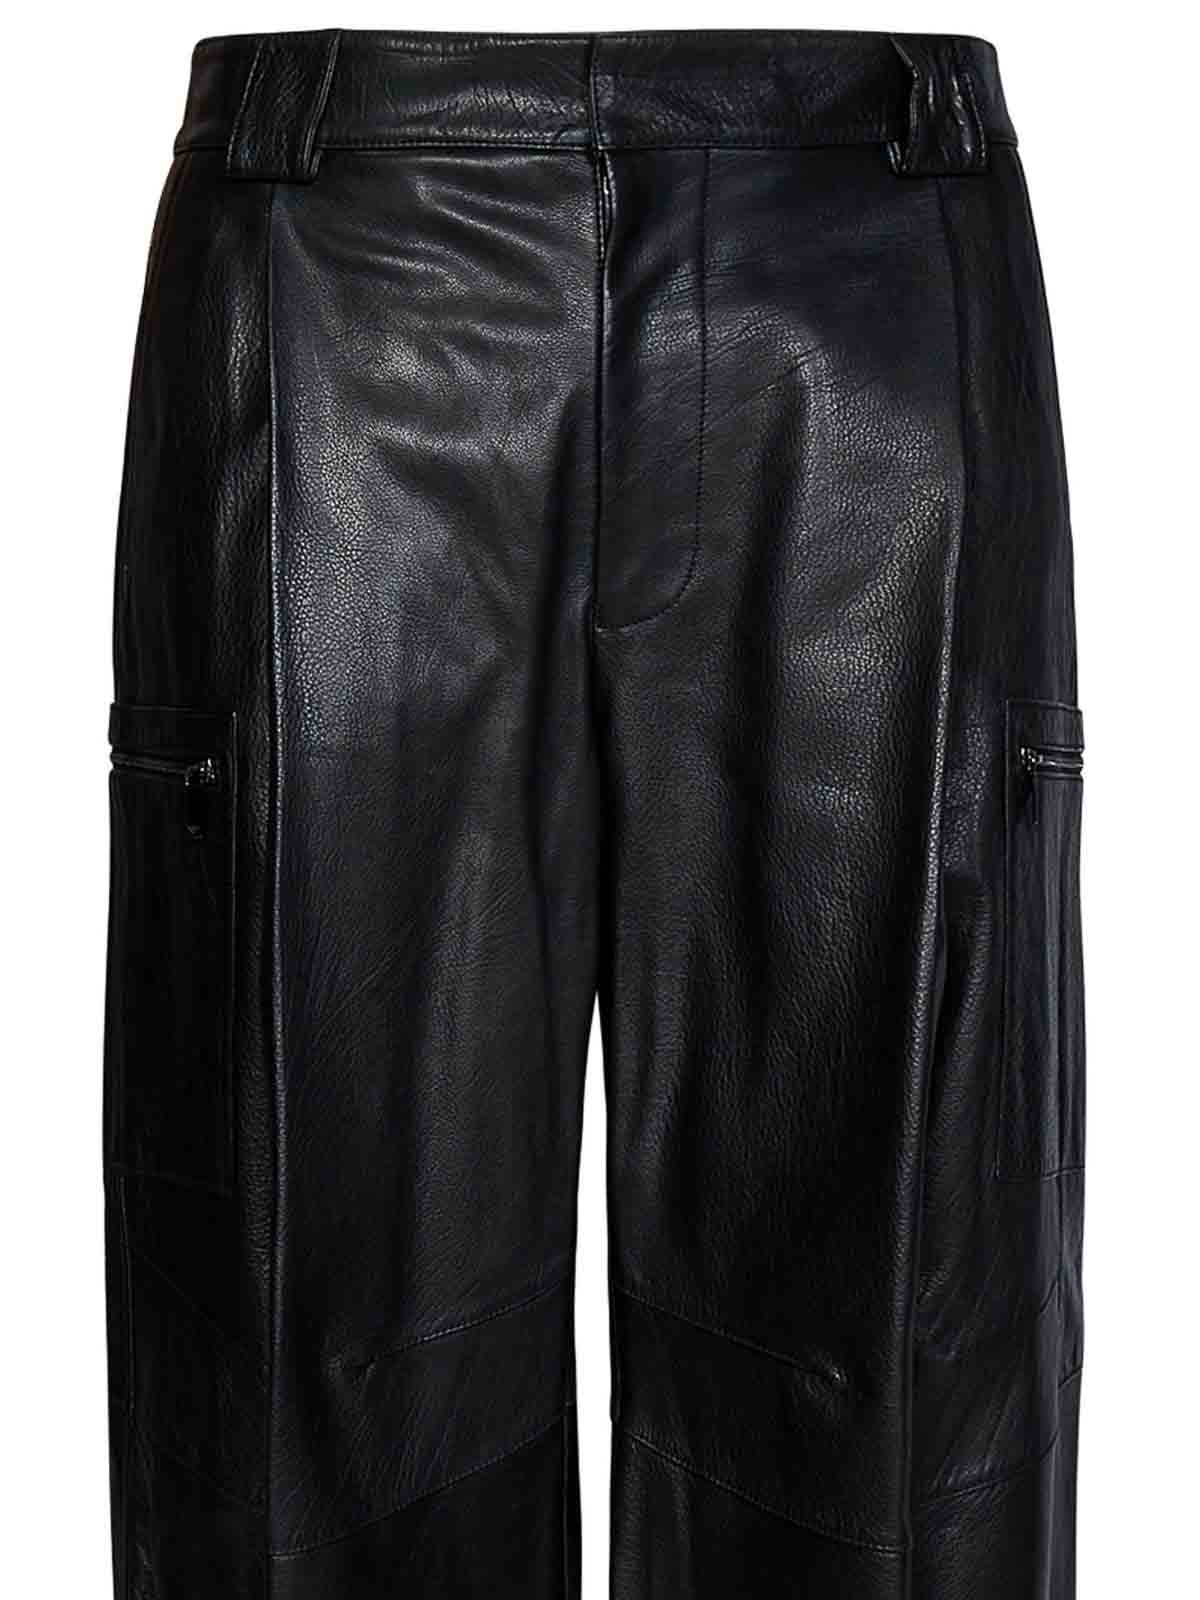 Emporio Armani Trousers Men – Itosca- All Rights Reserved